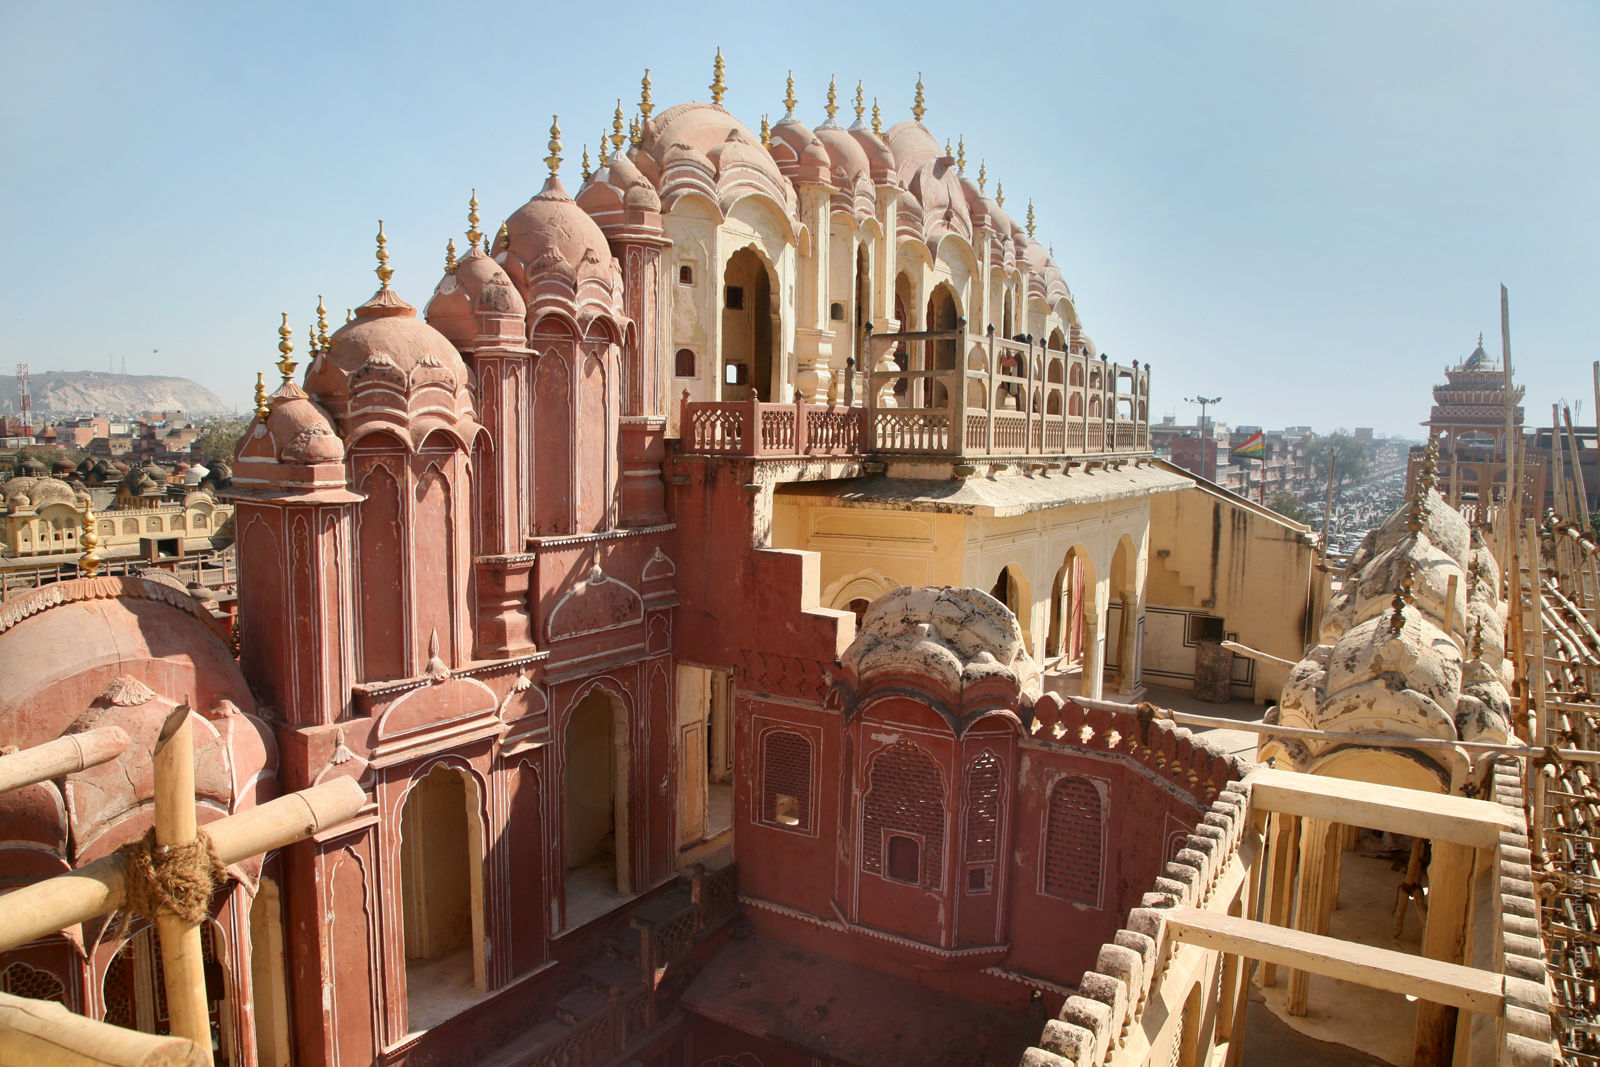 Palace of the Winds Hawa Mahal, Jaipur, tour of the Golden Triangle of India, September 2019.